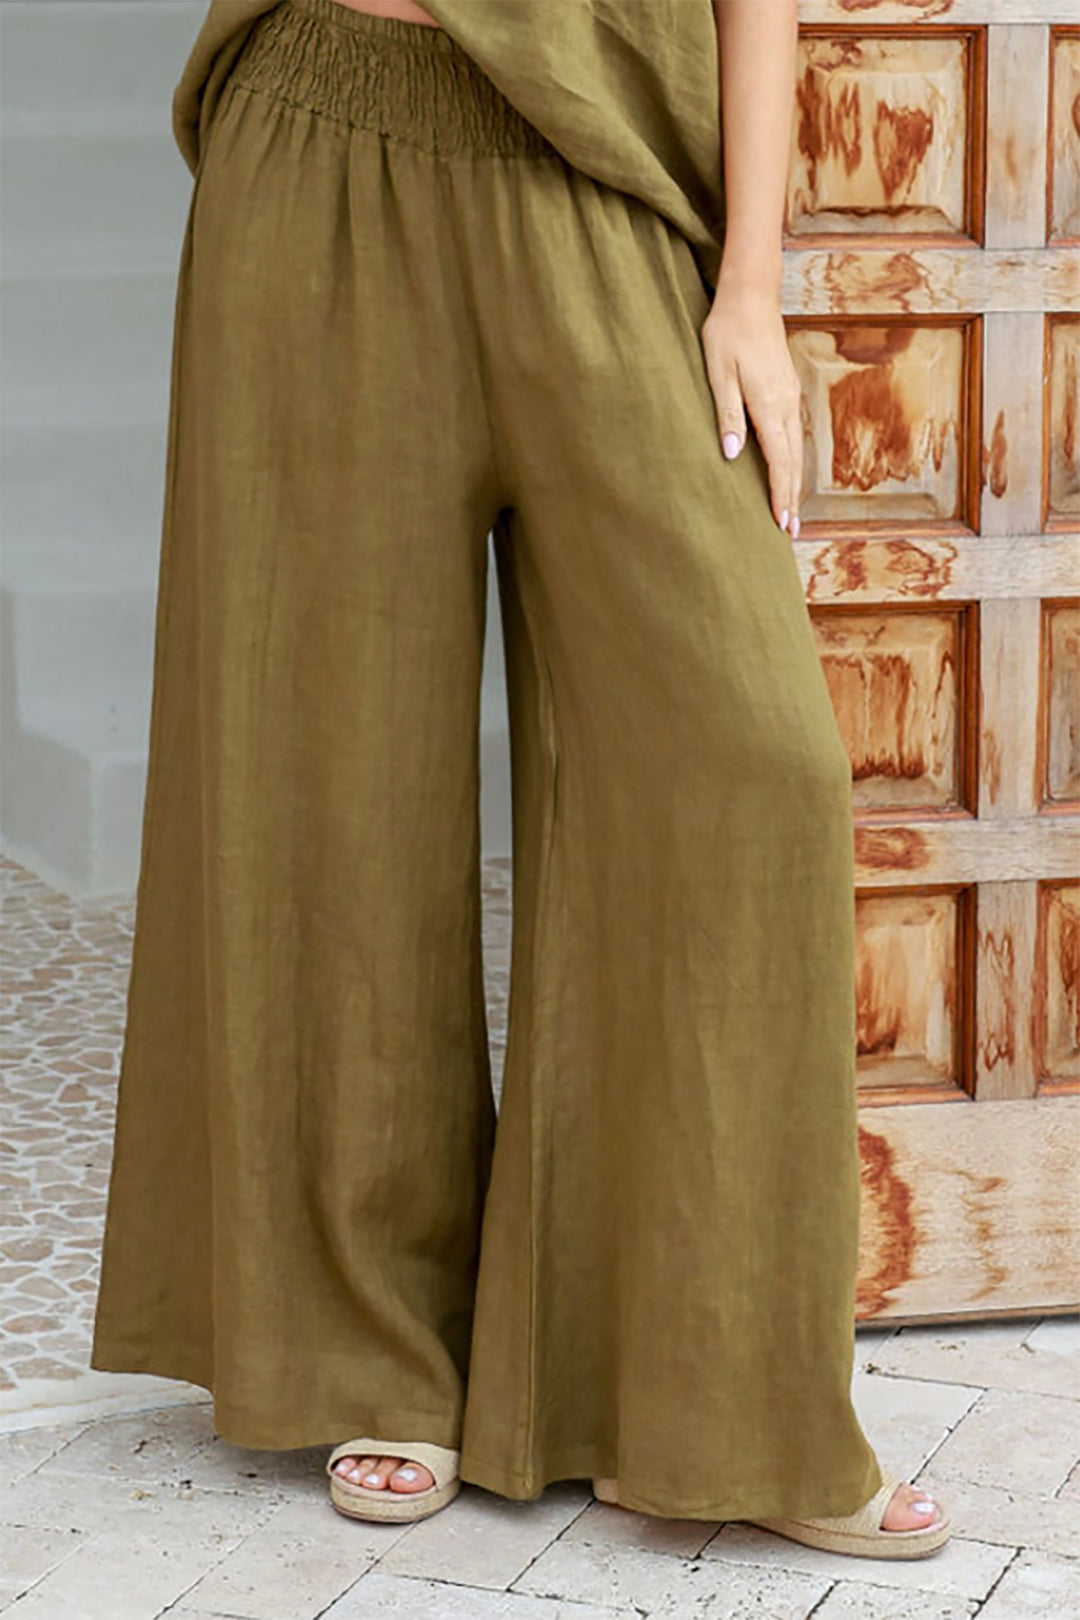 armana pants in olive by the Italian cartel